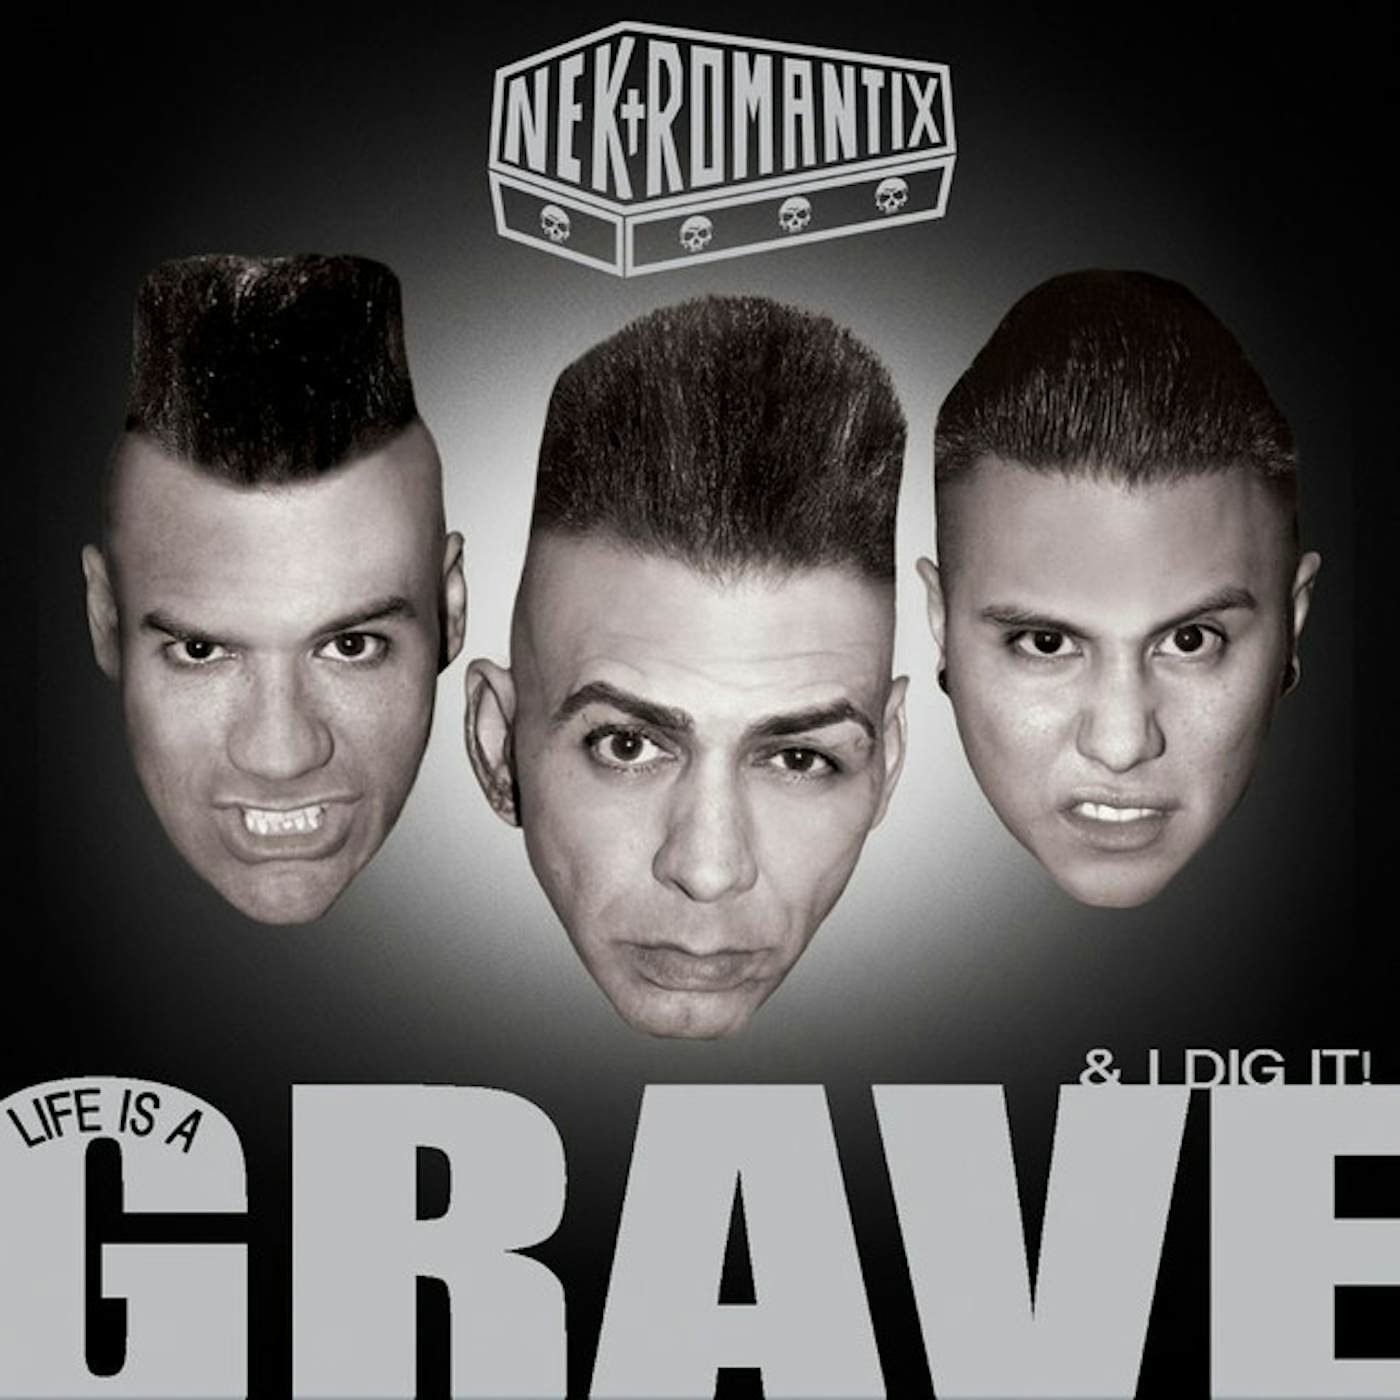 Nekromantix Life Is A Grave And I Dig It Vinyl Record